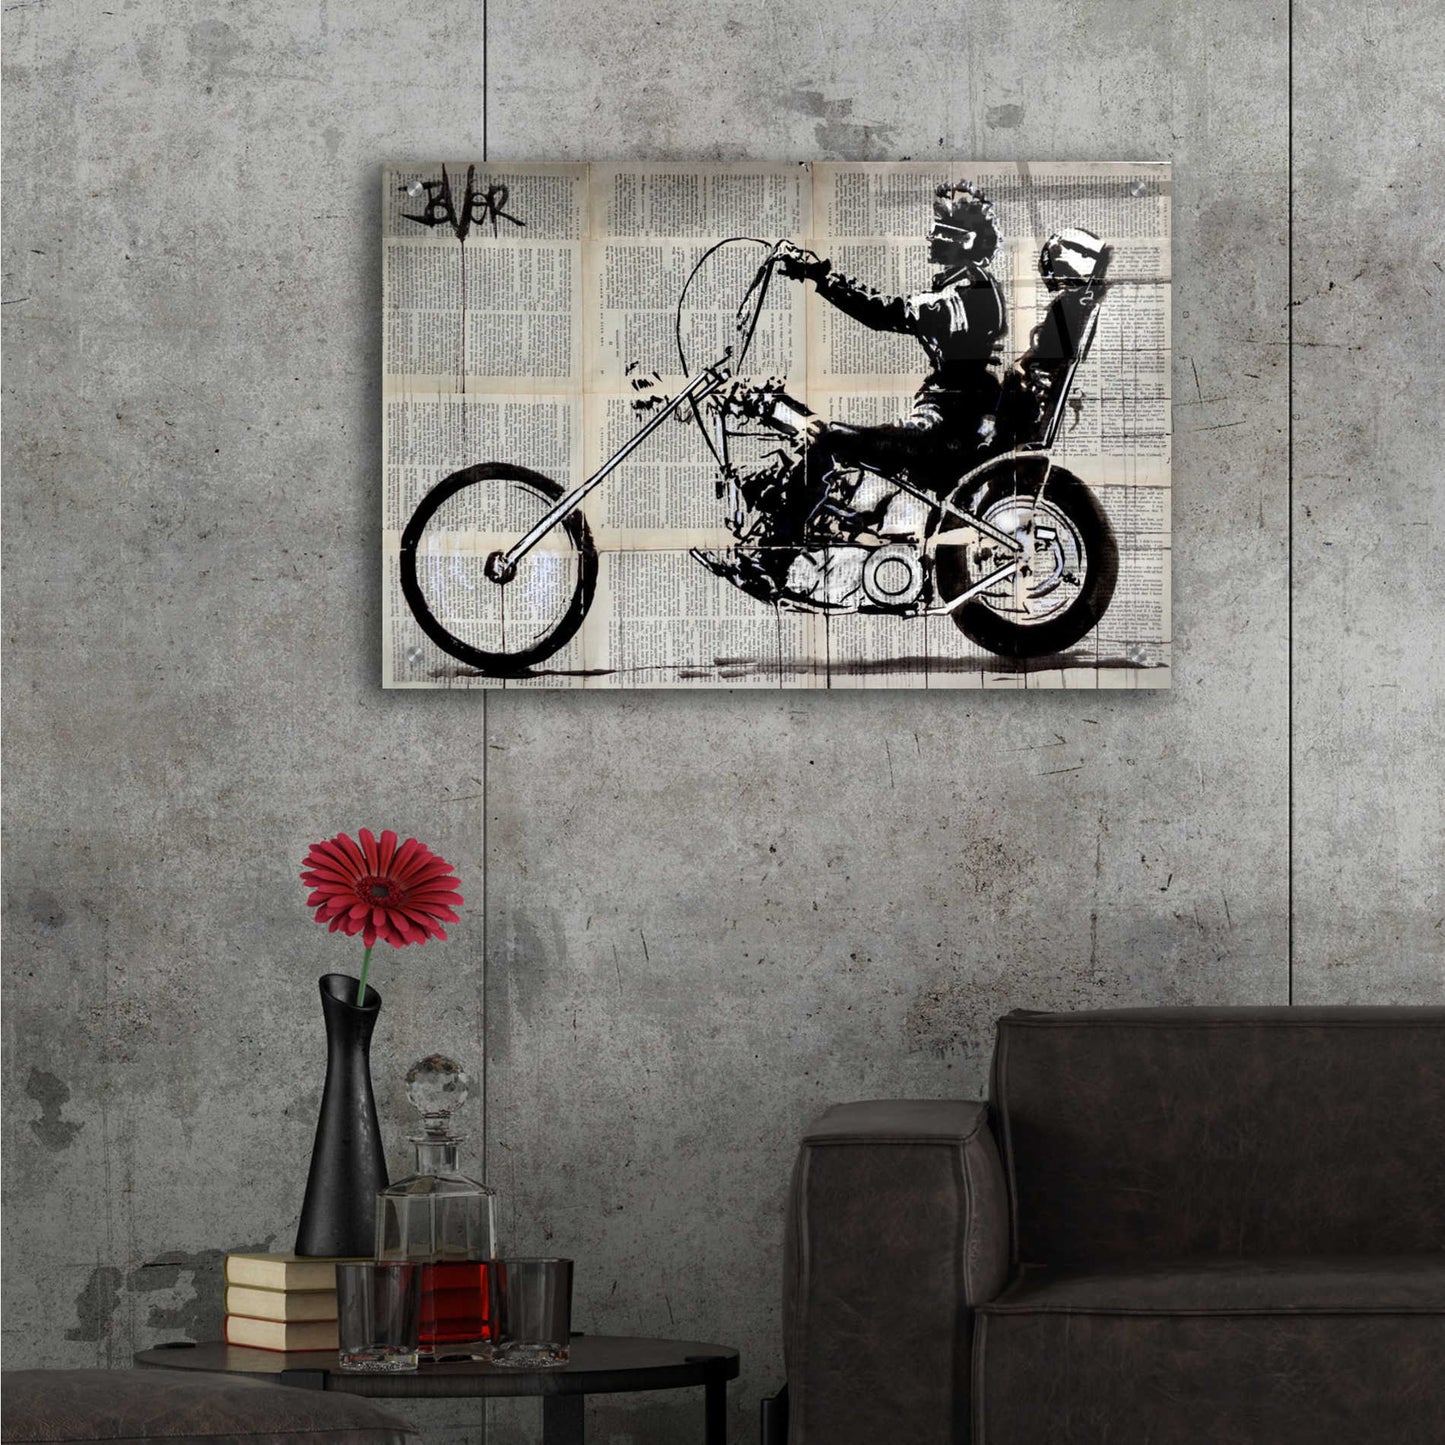 Epic Art 'Get Your Motor Running' by Loui Jover, Acrylic Glass Wall Art,24x16